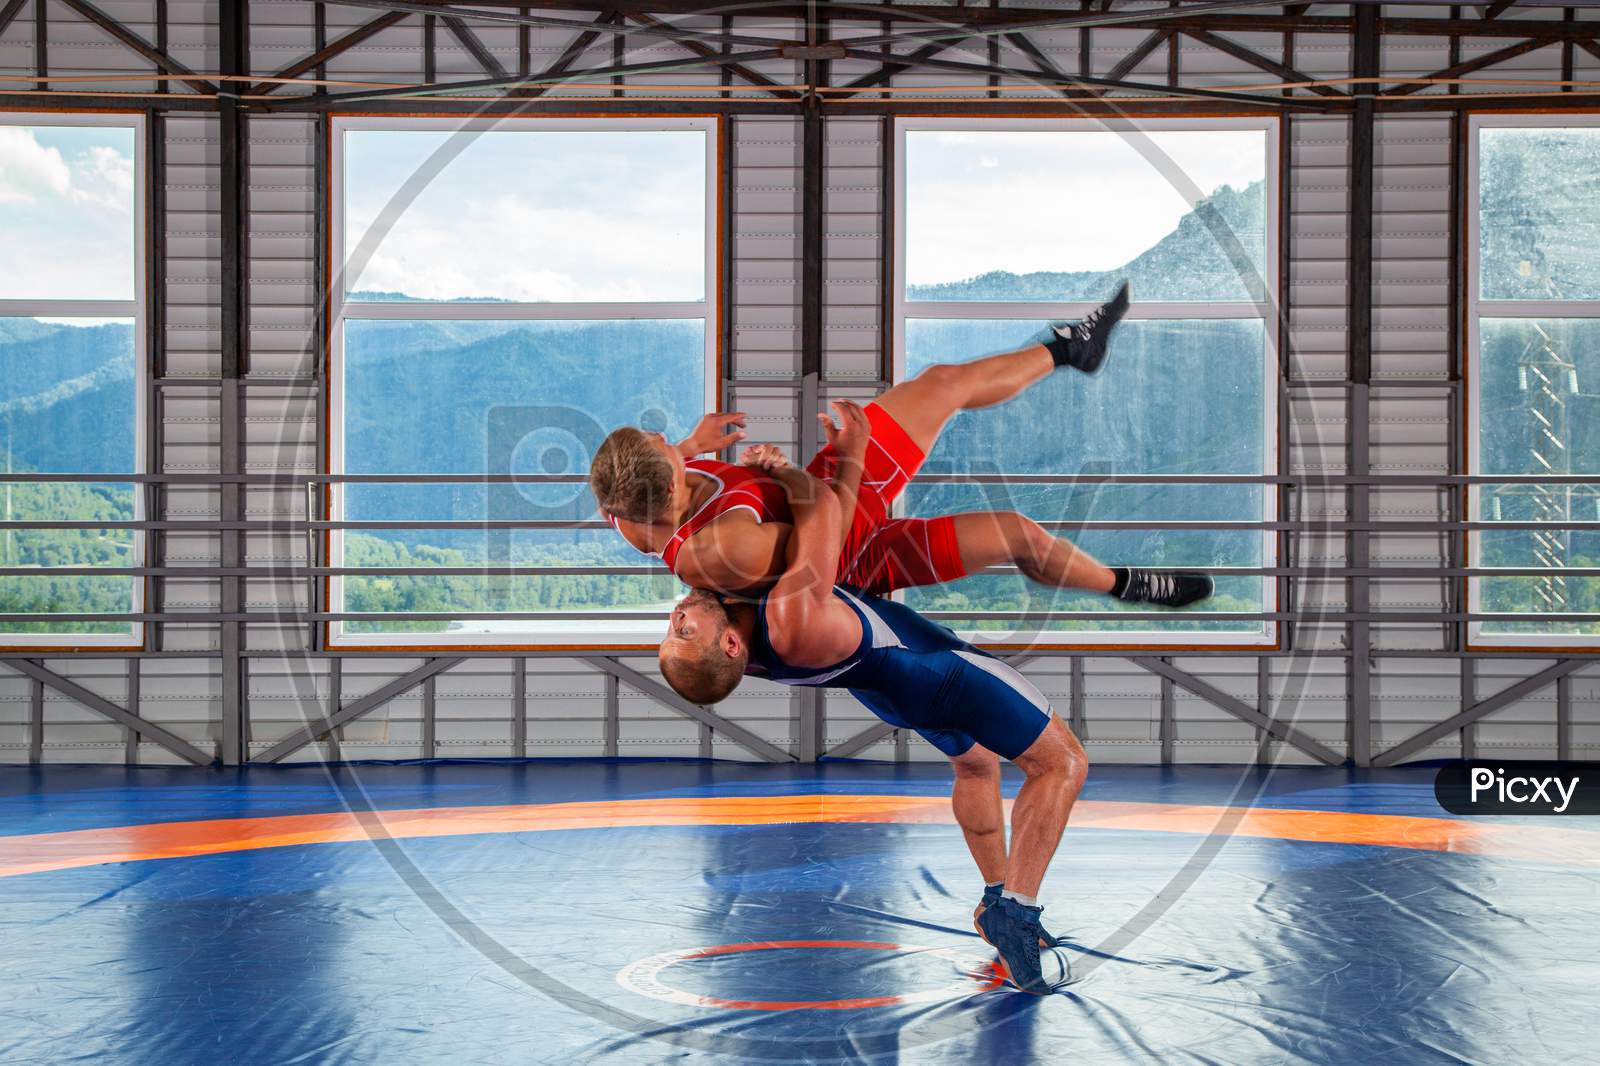 Two Young Men In Blue And Red Wrestling Tights Are Wrestlng And Making A Suplex Wrestling On A  Blue Wrestling Carpet In The Gym On The Background Of Mountains. The Concept Of Male Wrestling And Resistance